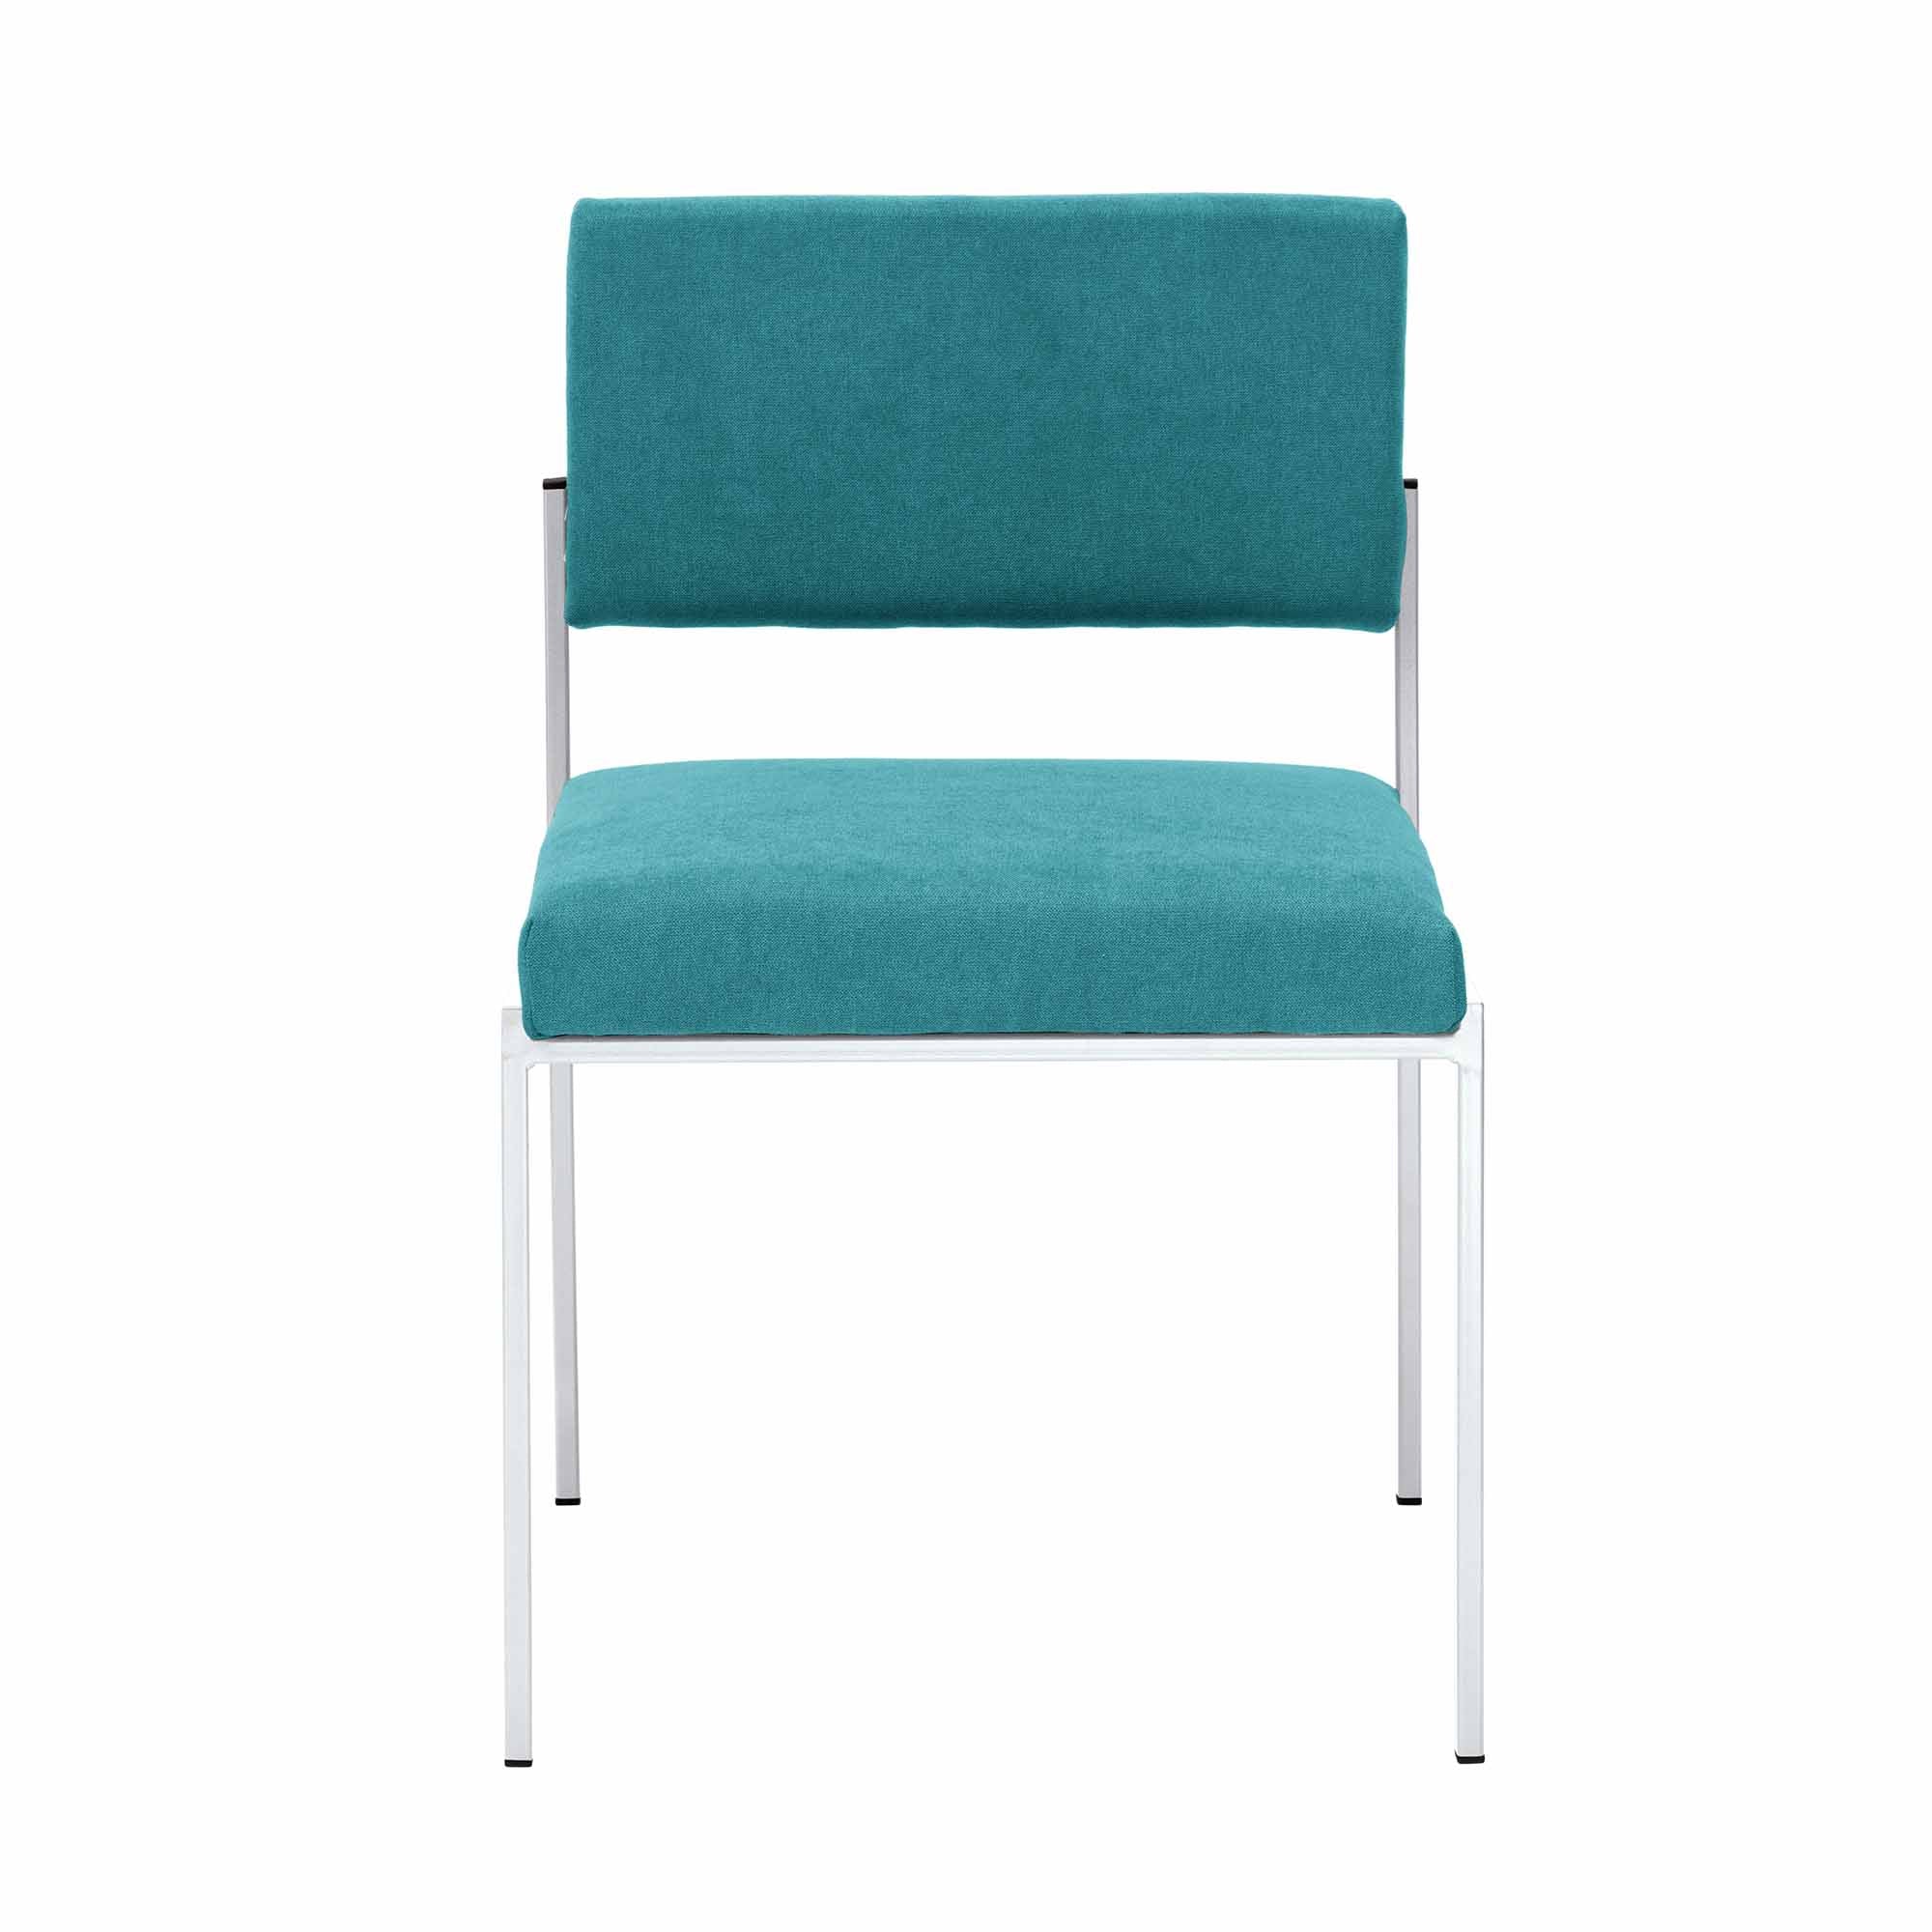  Chair, Powder-Coated Steel Frame, front view blue fabric, white frame